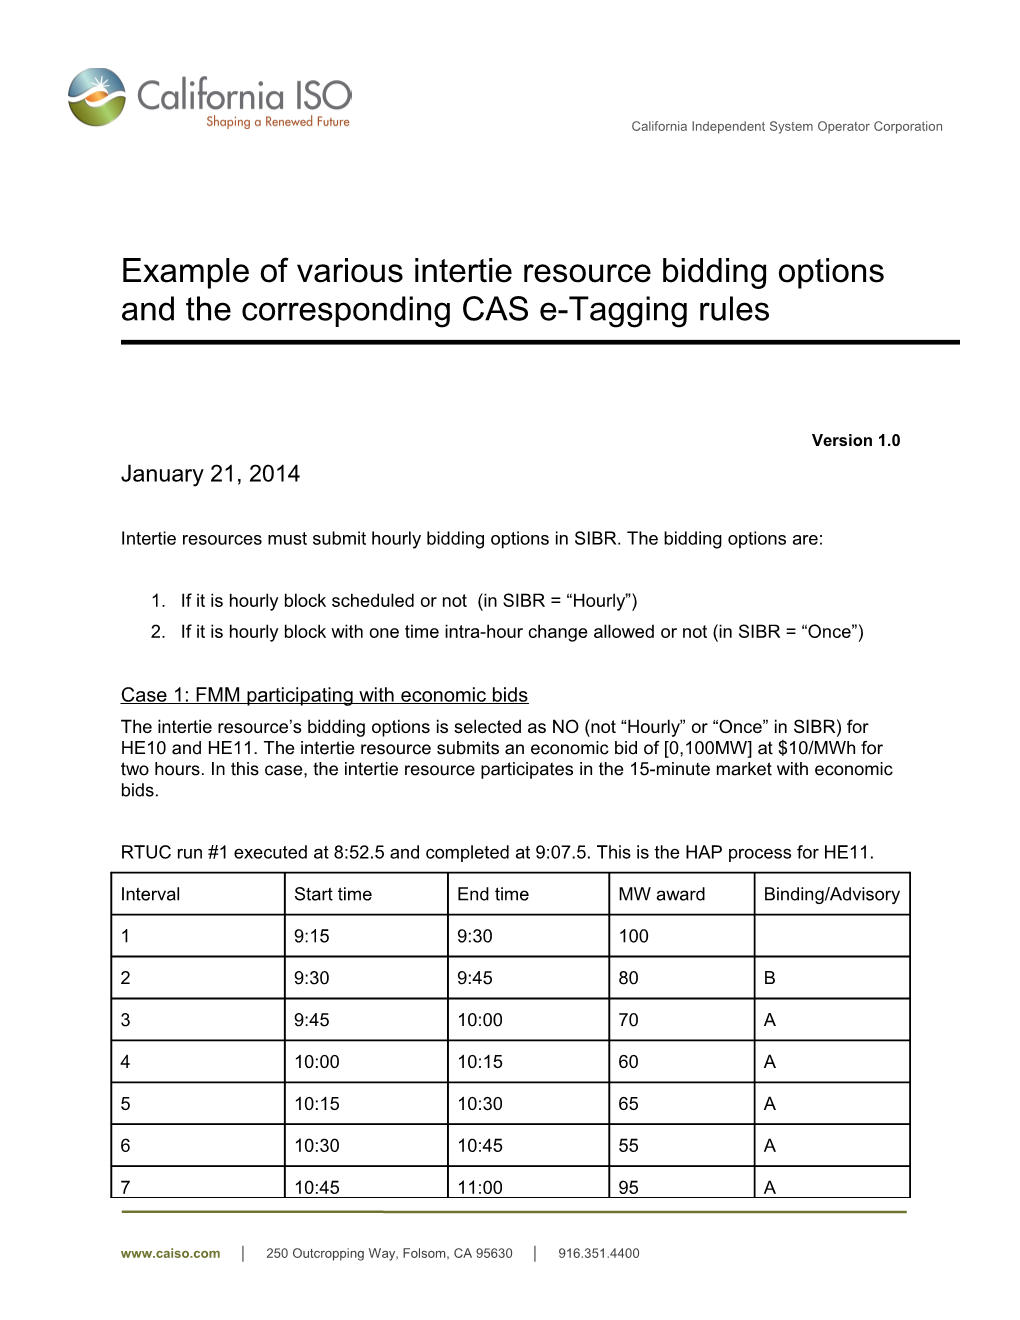 Example - Various Intertie Resource Bidding Options and Corresponding CAS E-Tagging Rules